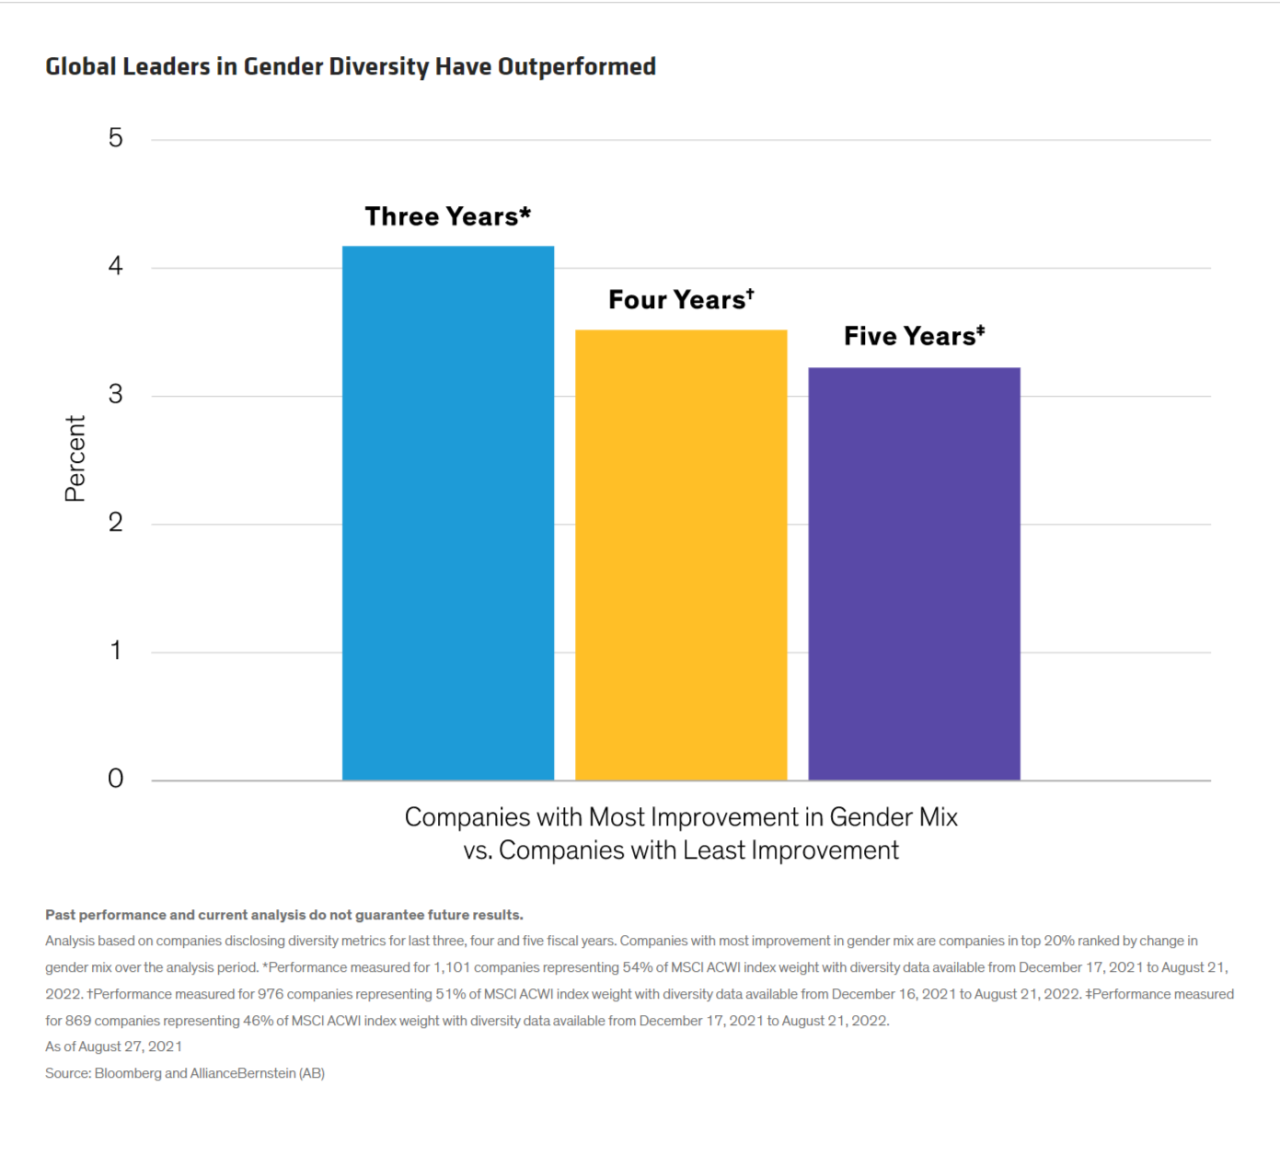 Bar graph showing Global Leaders in Gender Diversity Have Outperformed over five years